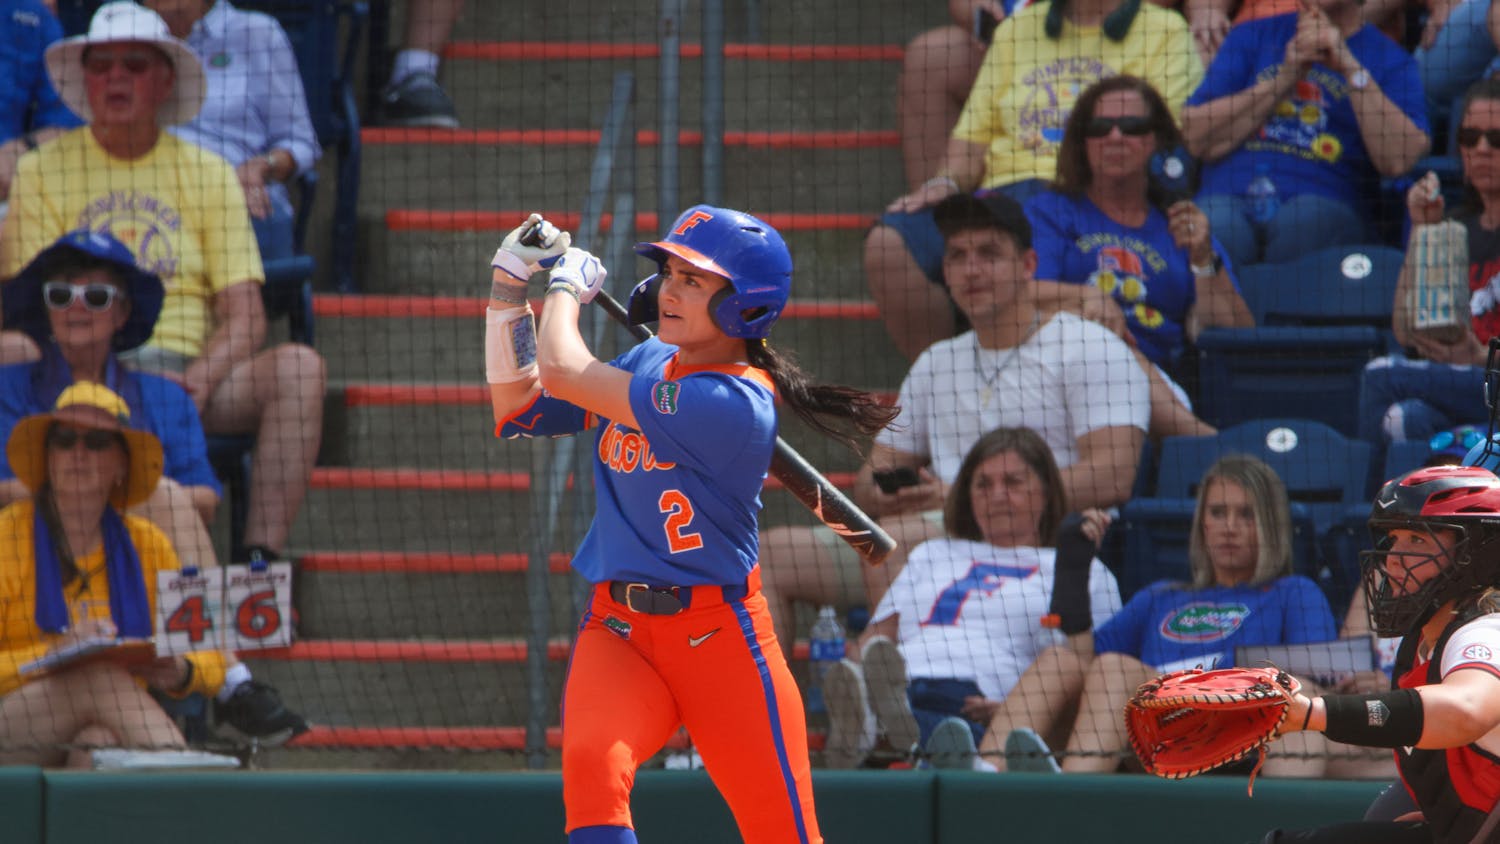 Florida infielder Avery Goelz finishes her swing in the Gators' 8-7 win against the Georgia Bulldogs Saturday, April 15, 2023